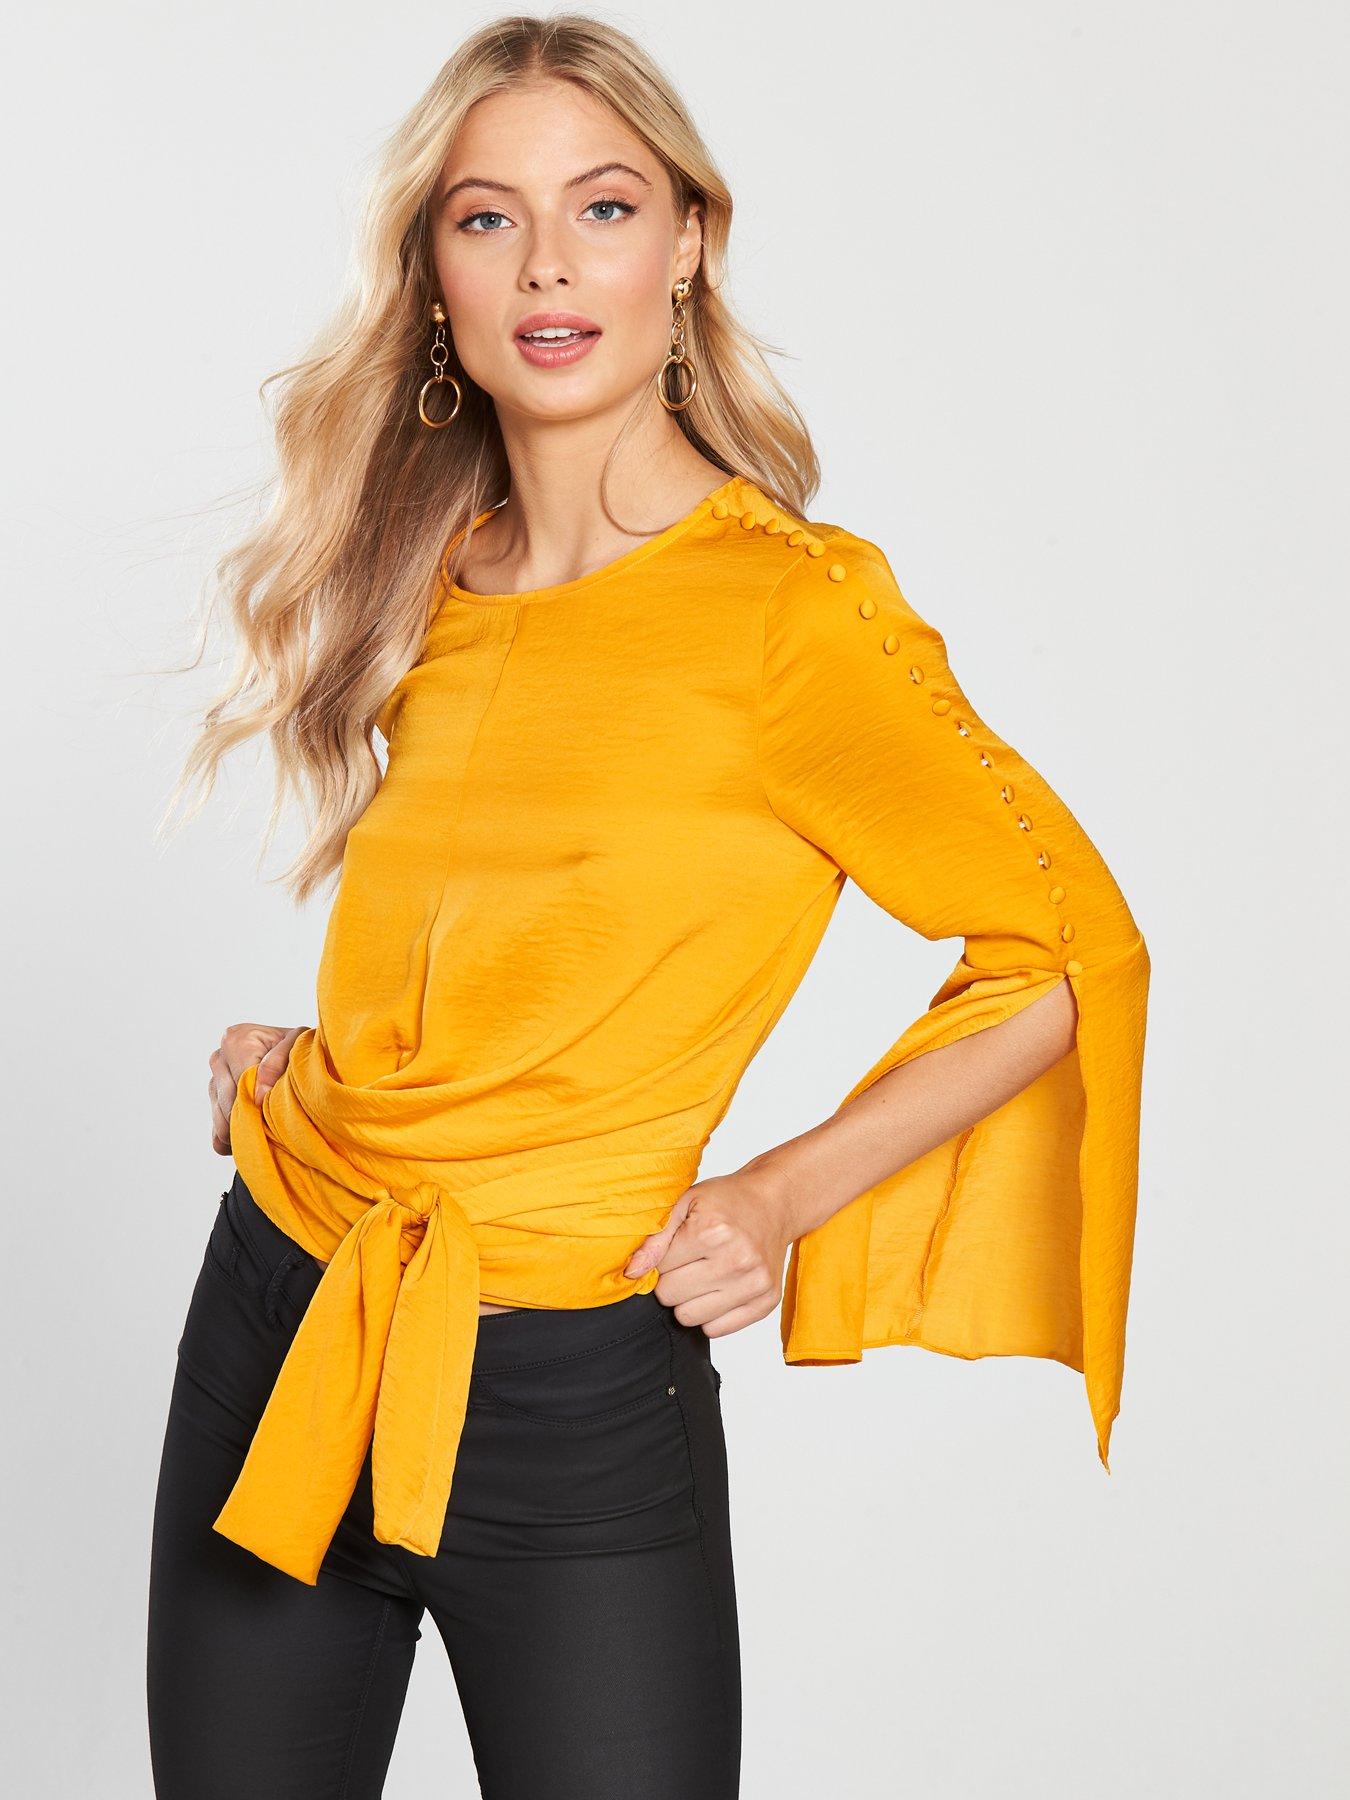 Ladies Blouses | Women's Blouses & Shirts | Very.co.uk